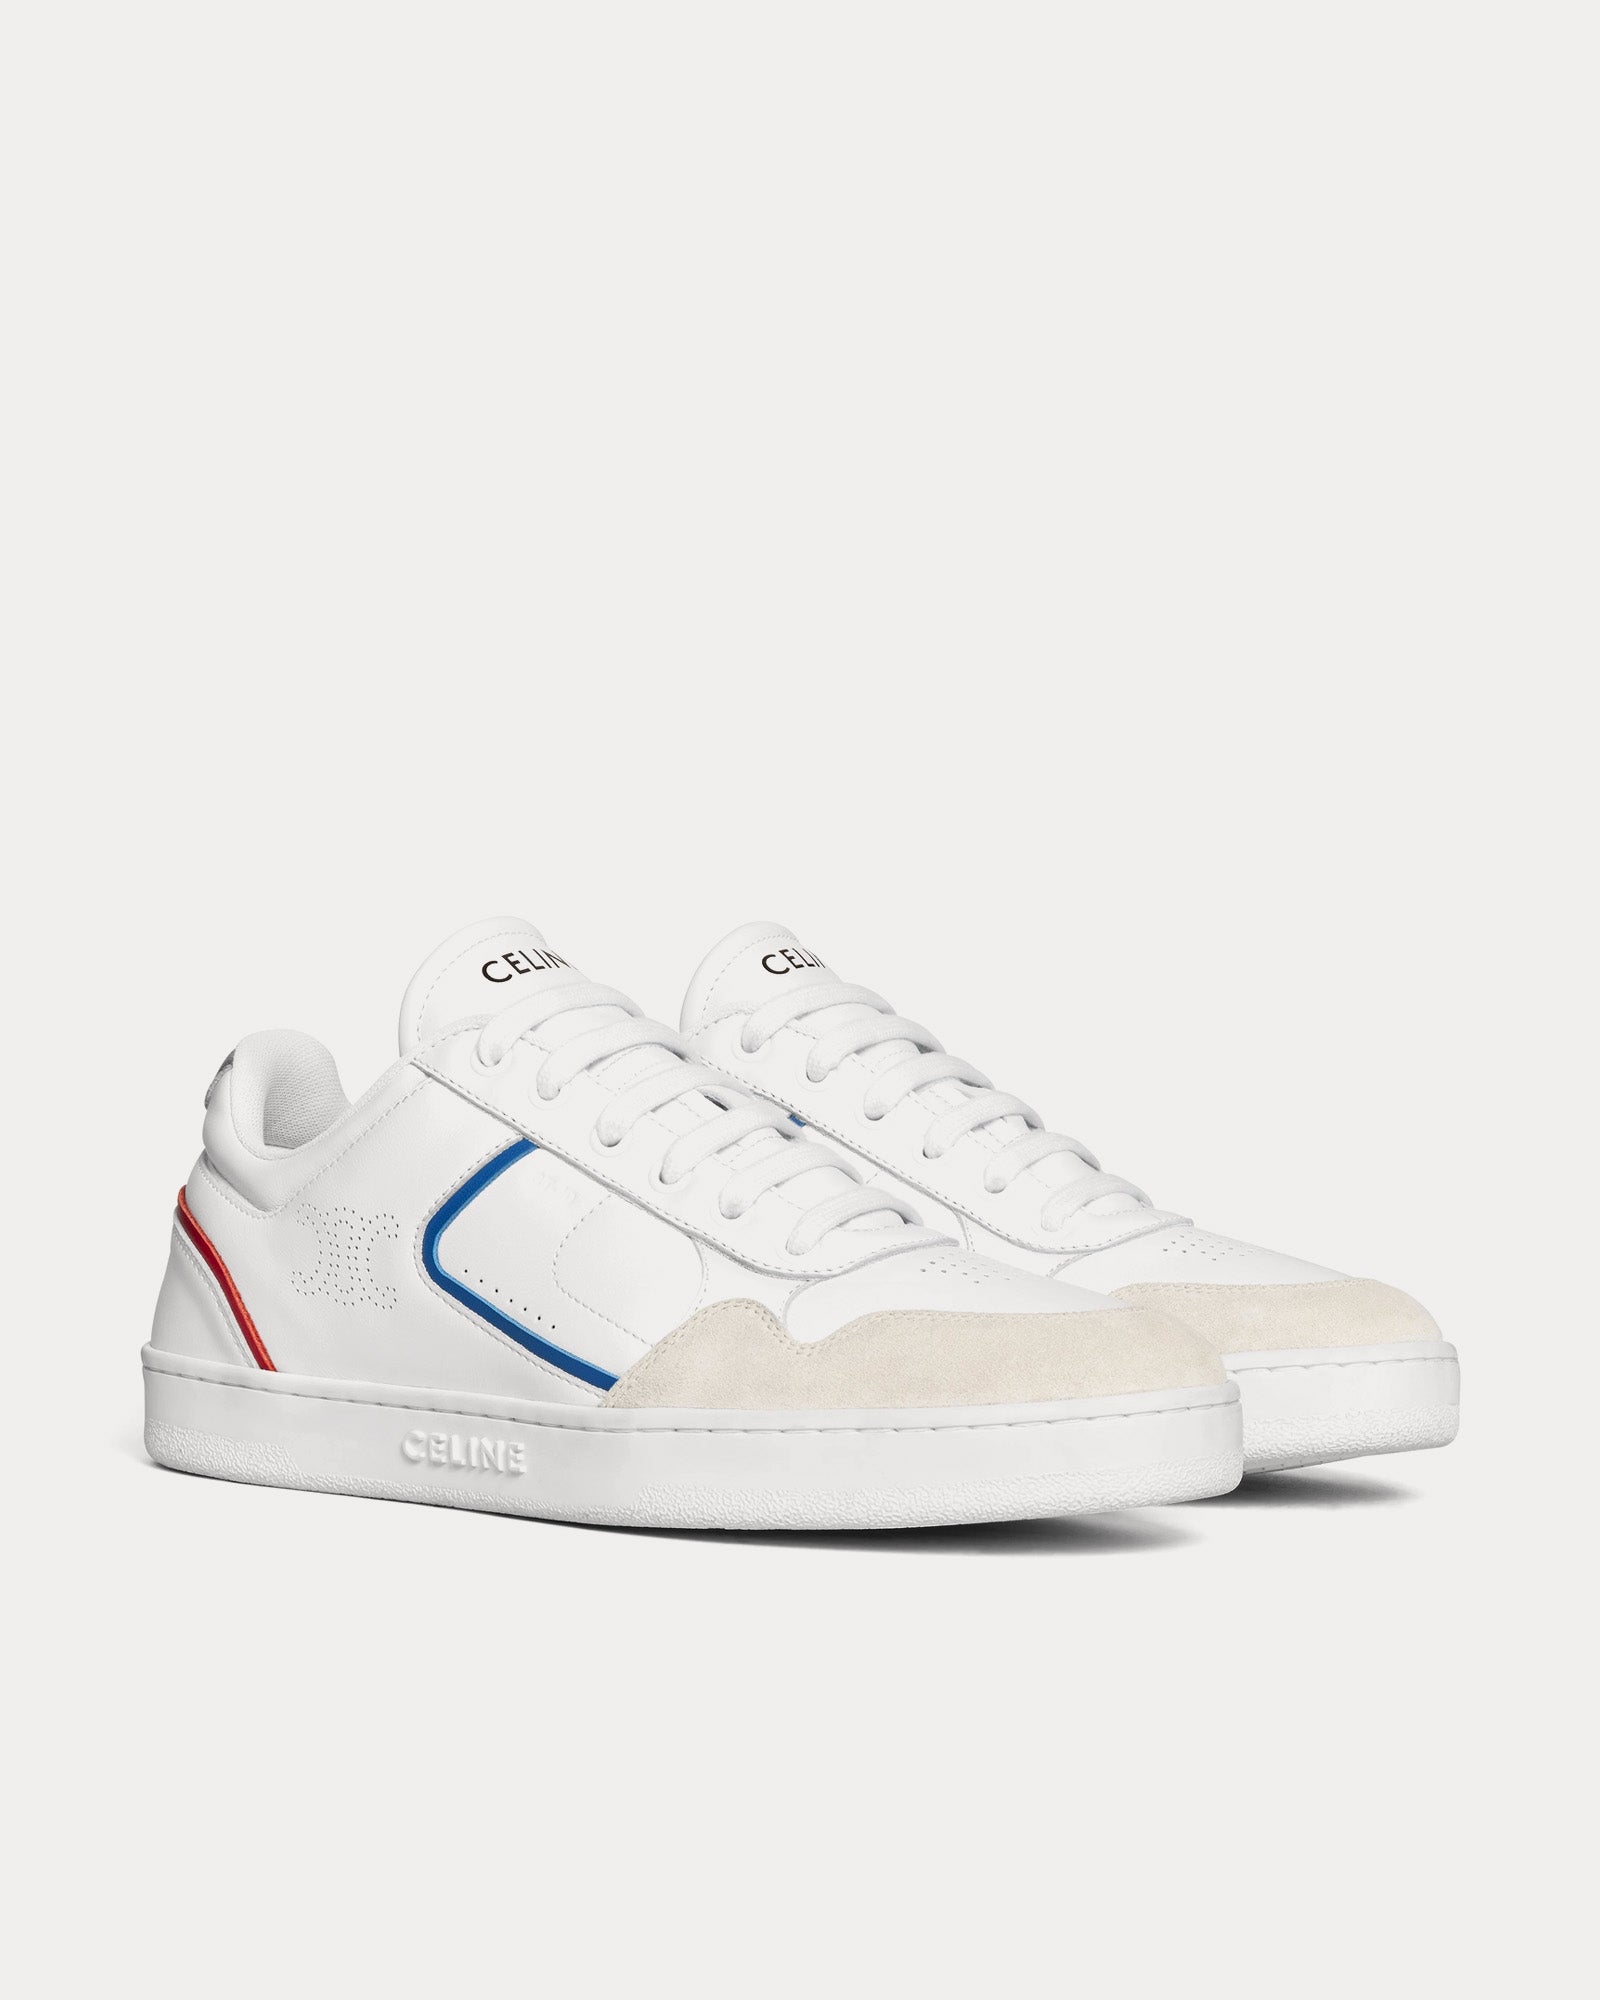 Celine - CT-10 Lace-Up Calfskin Optic White / Blue / Red / Silver Low Top Sneakers